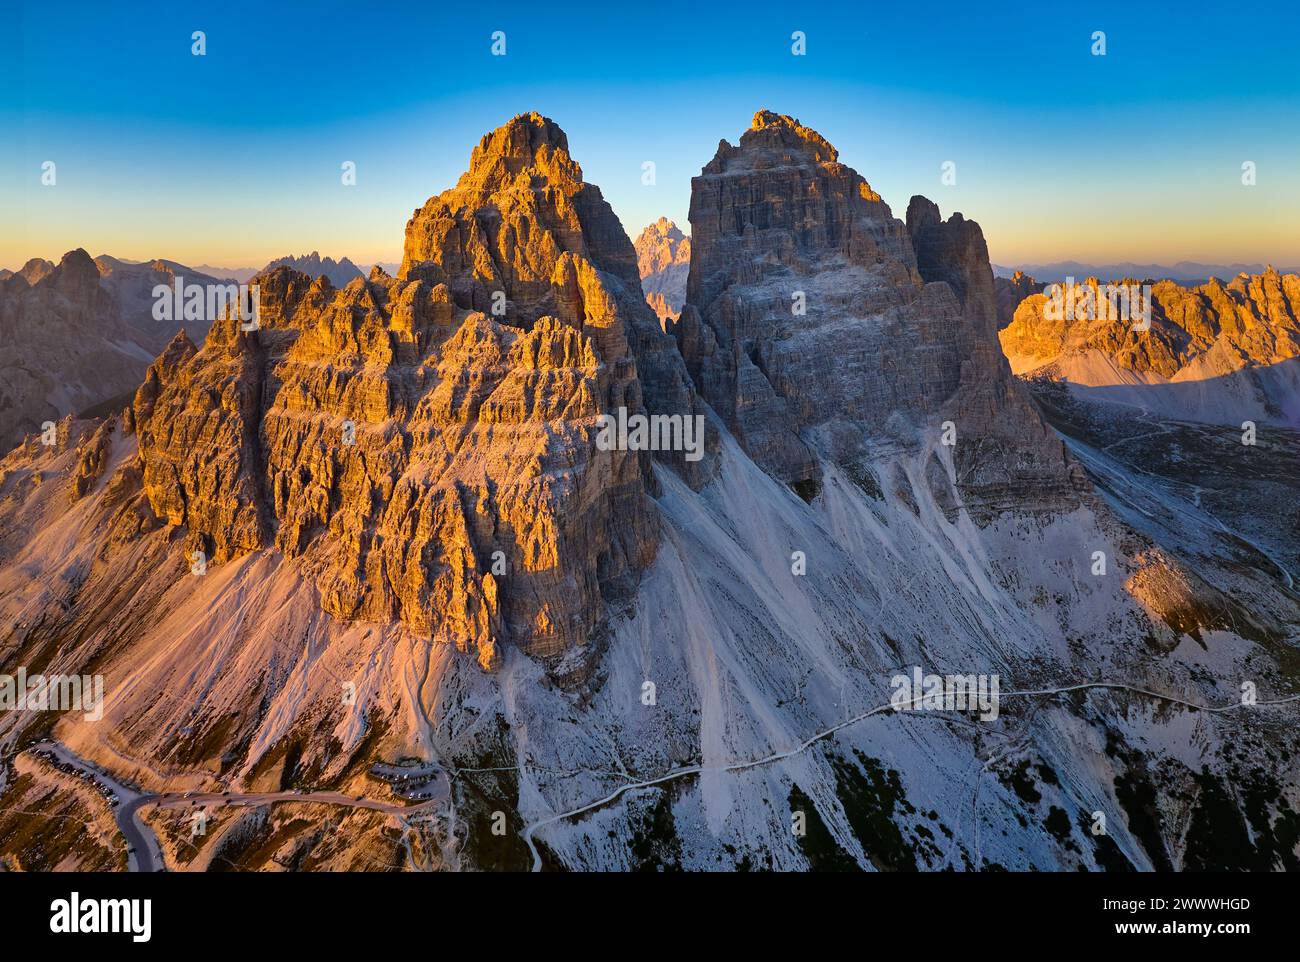 Aerial view from high altitude of Tre Cime di Lavaredo peaks orange lit by the setting sun, with a Dolomites mountain panorama. Stock Photo